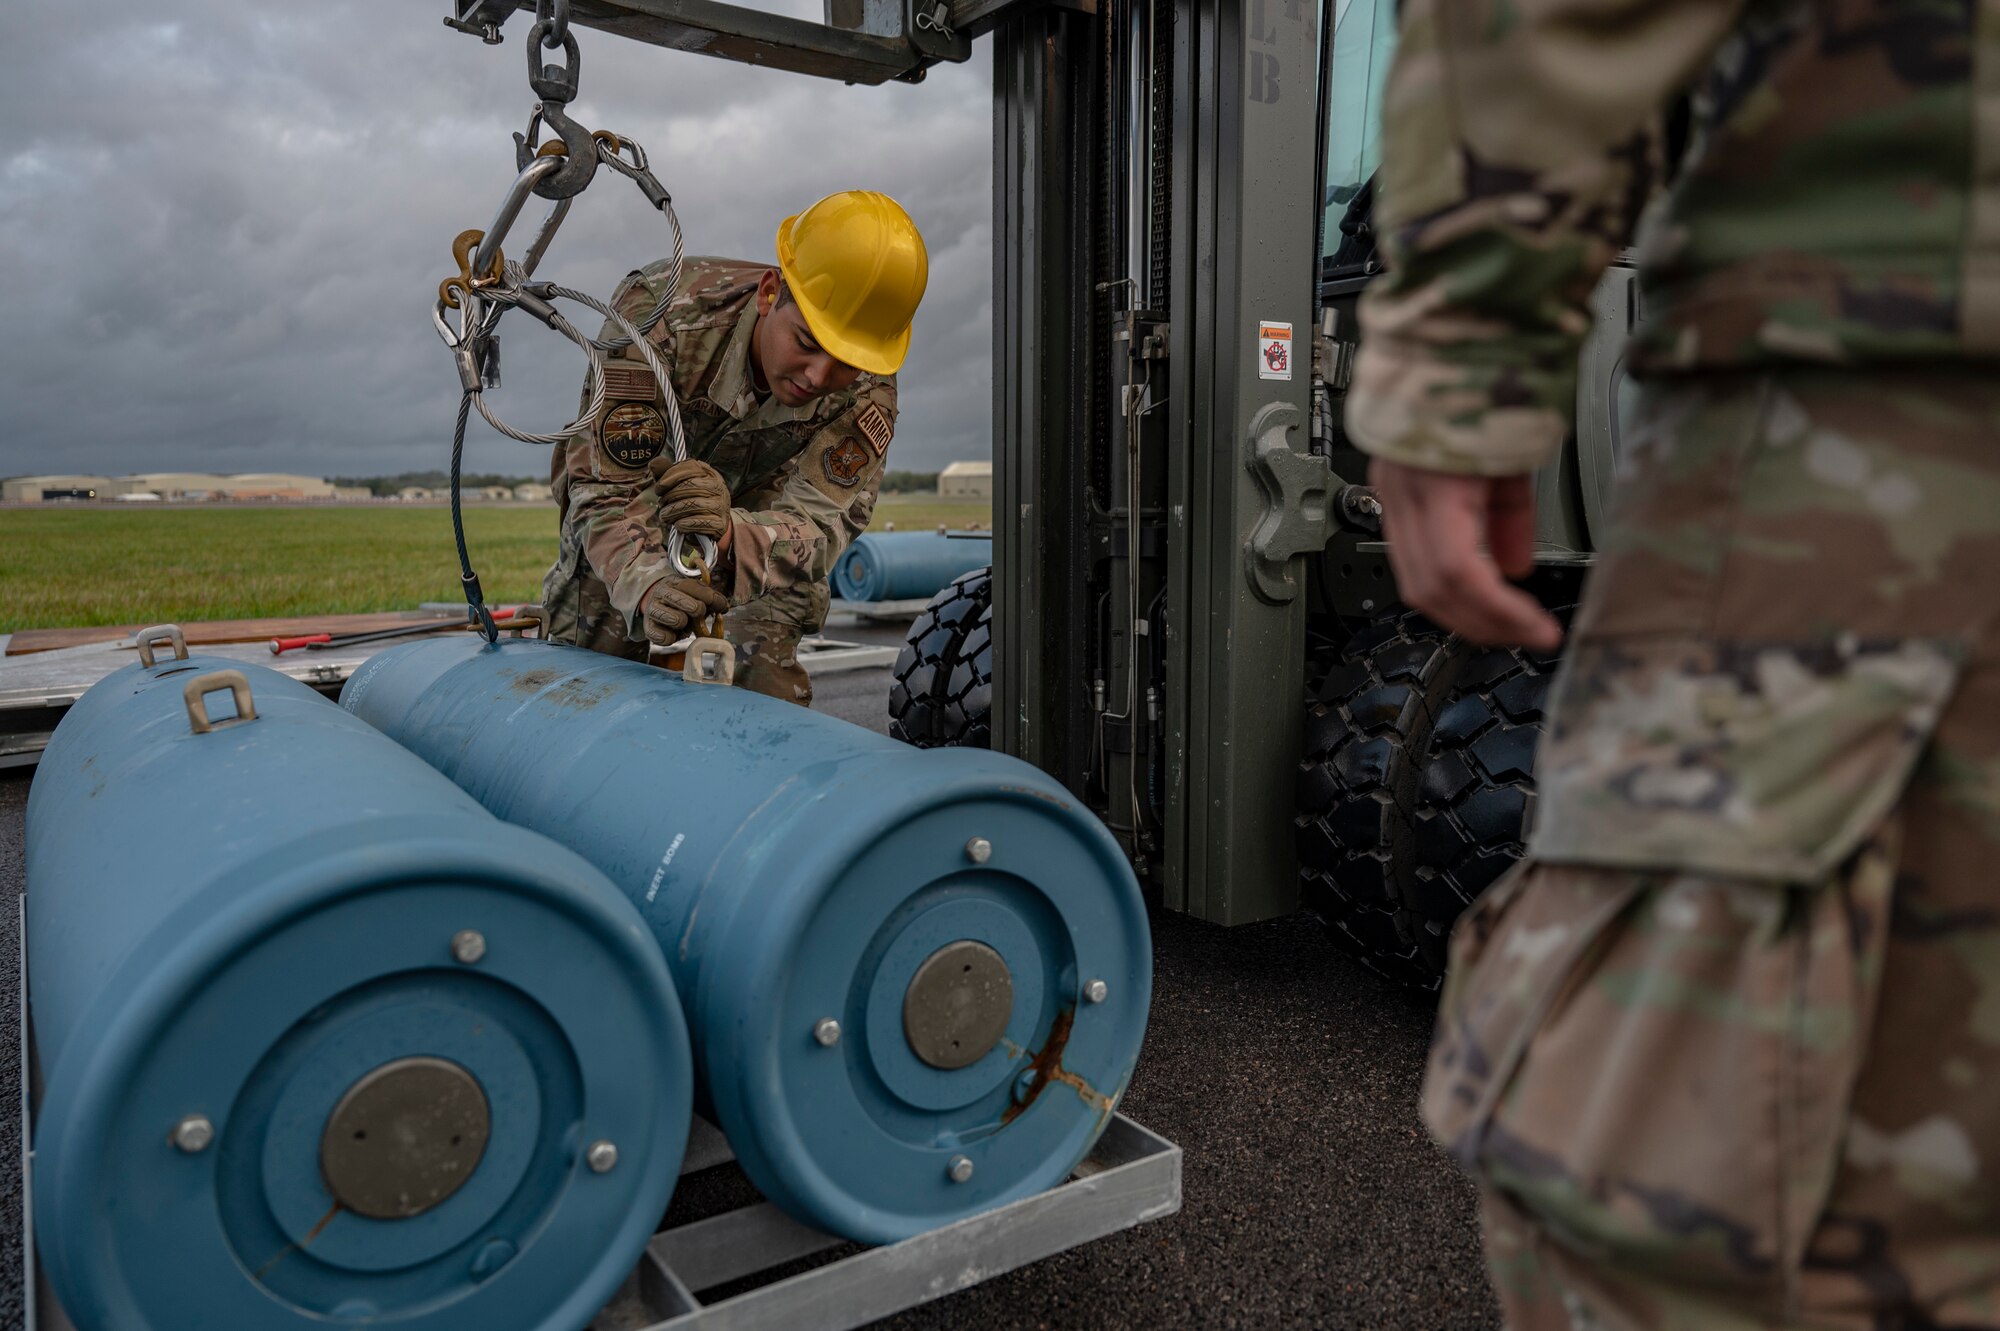 Airman 1st Class Hector Olazaran, 9th Expeditionary Bomb Squadron line delivery crew chief, prepares an inert bomb to be lifted by a forklift during an inert ammo bomb building event at RAF Fairford, United Kingdom, Oct. 13, 2023. U.S. Strategic Command regularly tests and evaluates the readiness of assets to ensure deterrence is strong and credible. (U.S. Air Force Photo by Senior Airman Ryan Hayman)